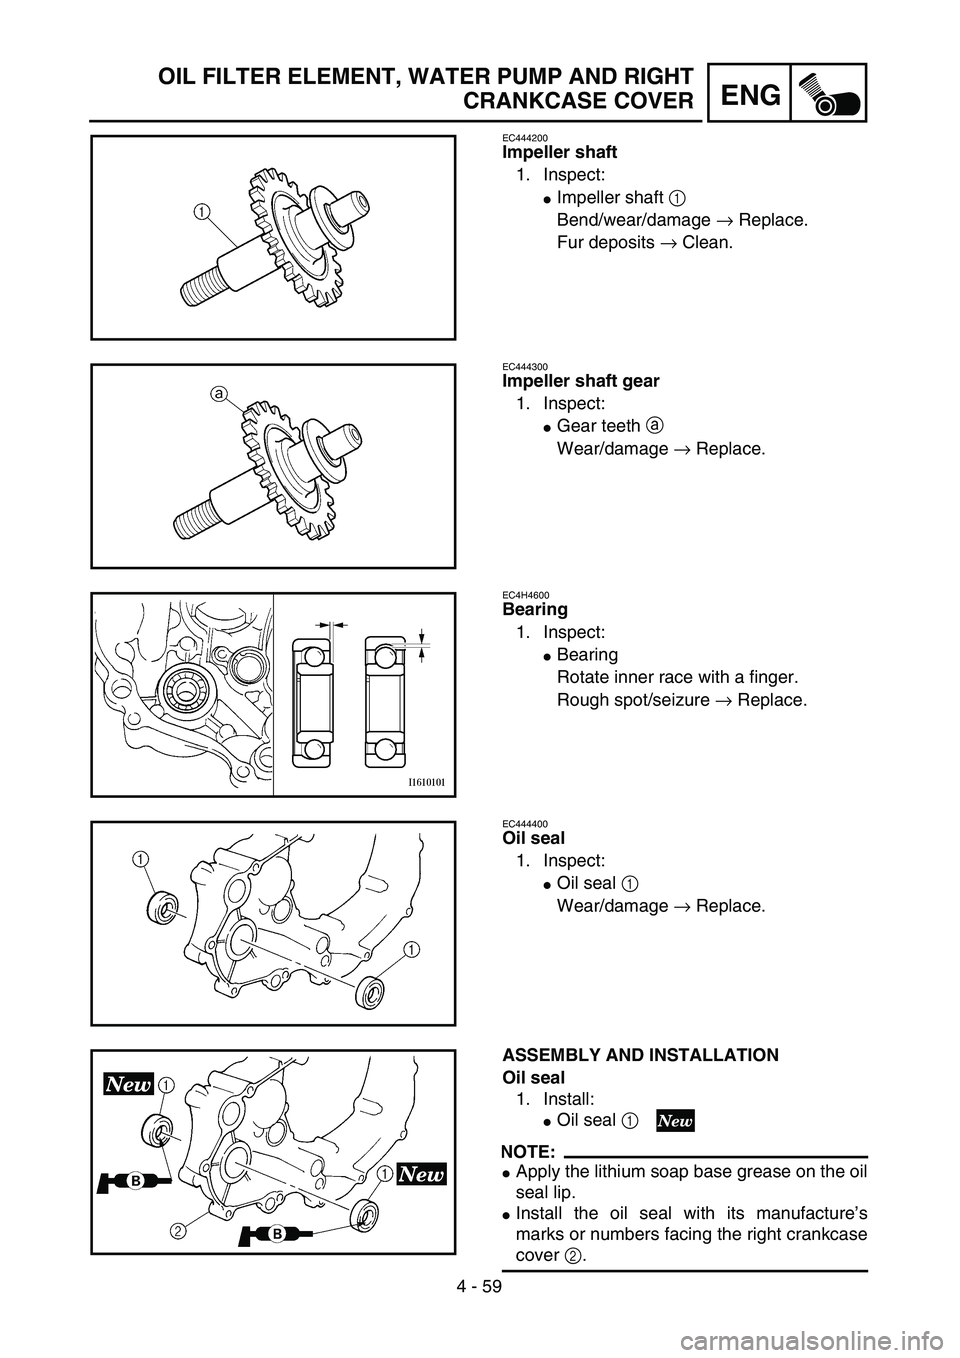 YAMAHA YZ250F 2002  Owners Manual 4 - 59
ENG
OIL FILTER ELEMENT, WATER PUMP AND RIGHT
CRANKCASE COVER
EC444200
Impeller shaft
1. Inspect:
Impeller shaft 1 
Bend/wear/damage → Replace.
Fur deposits → Clean.
EC444300
Impeller shaft